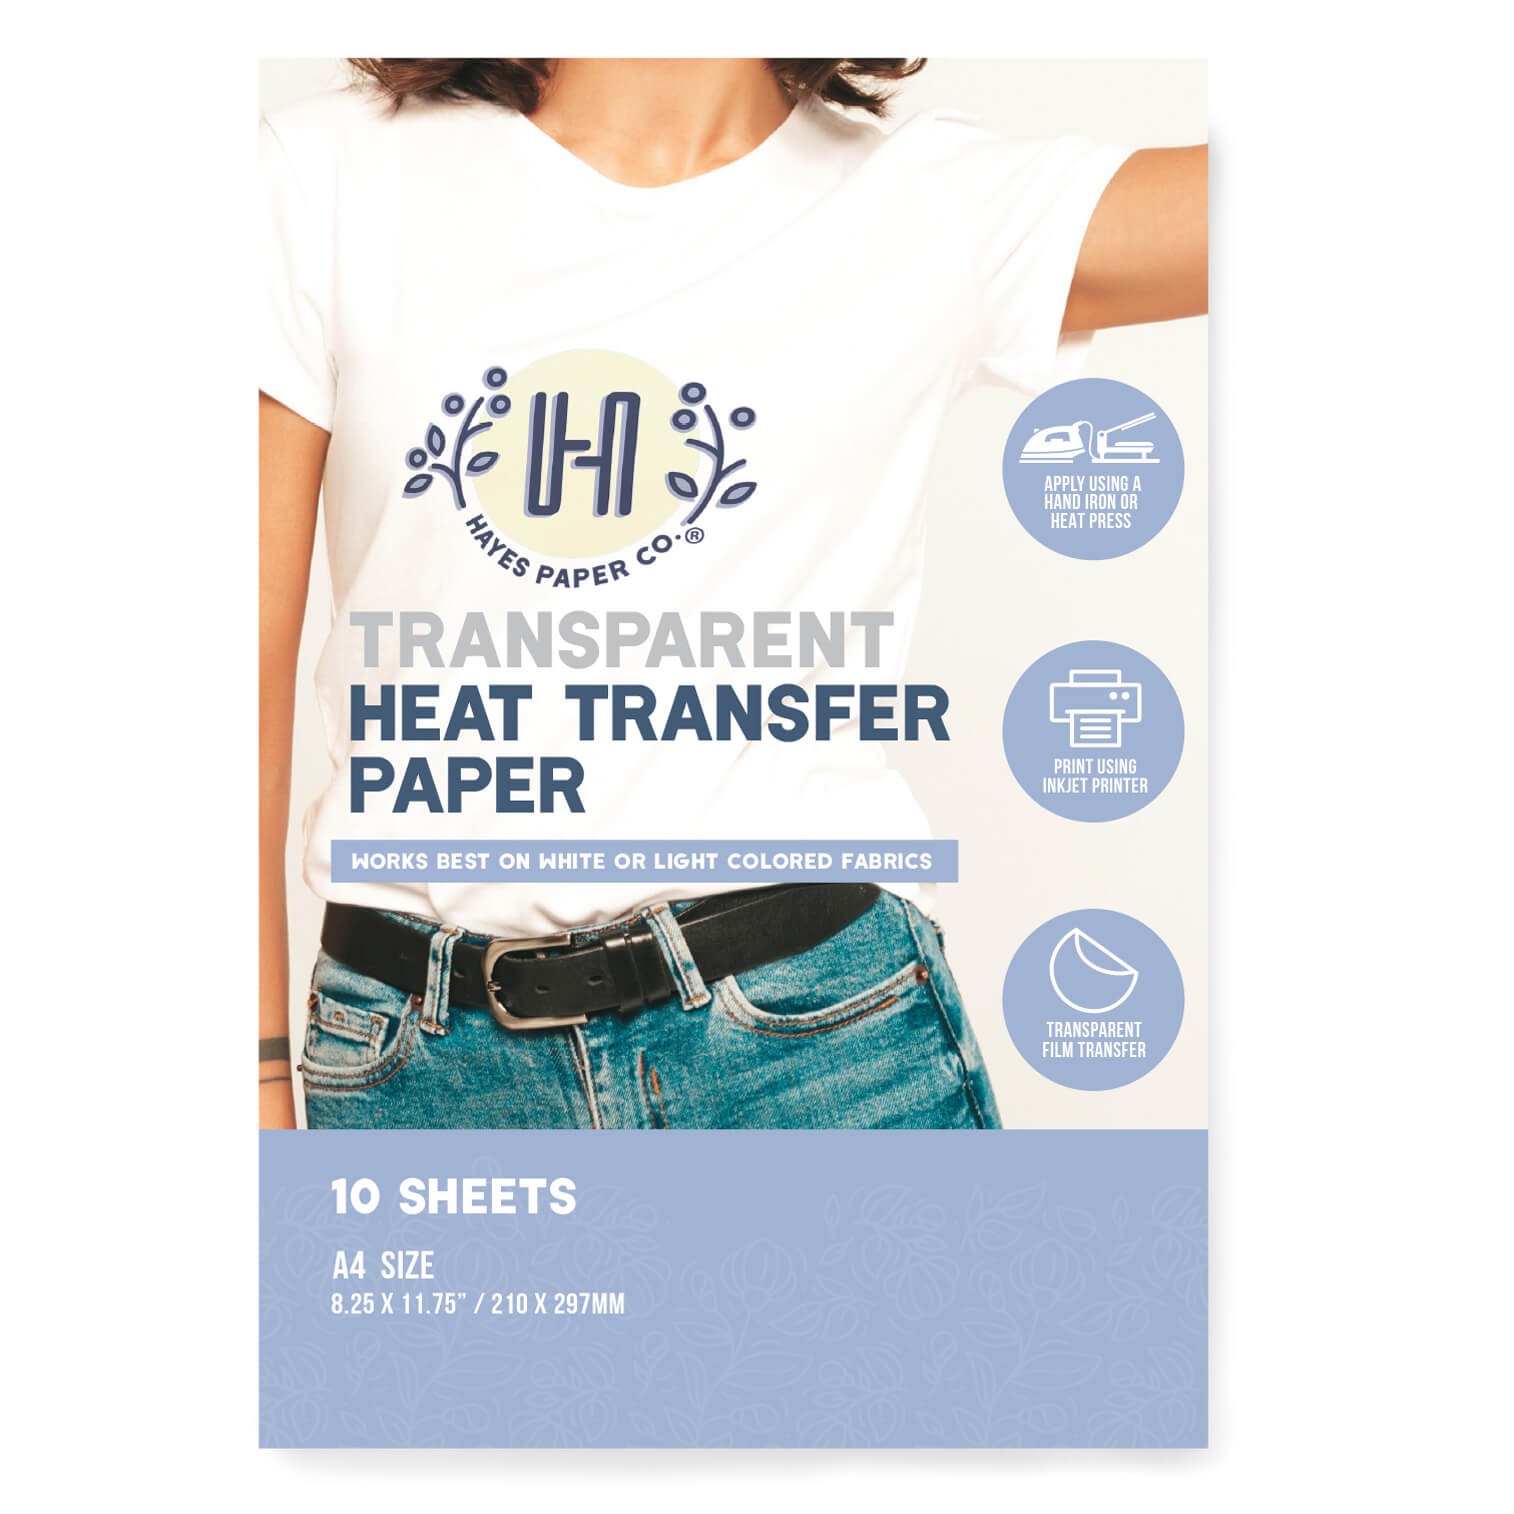 How to print HP iron-on transfers for light fabrics